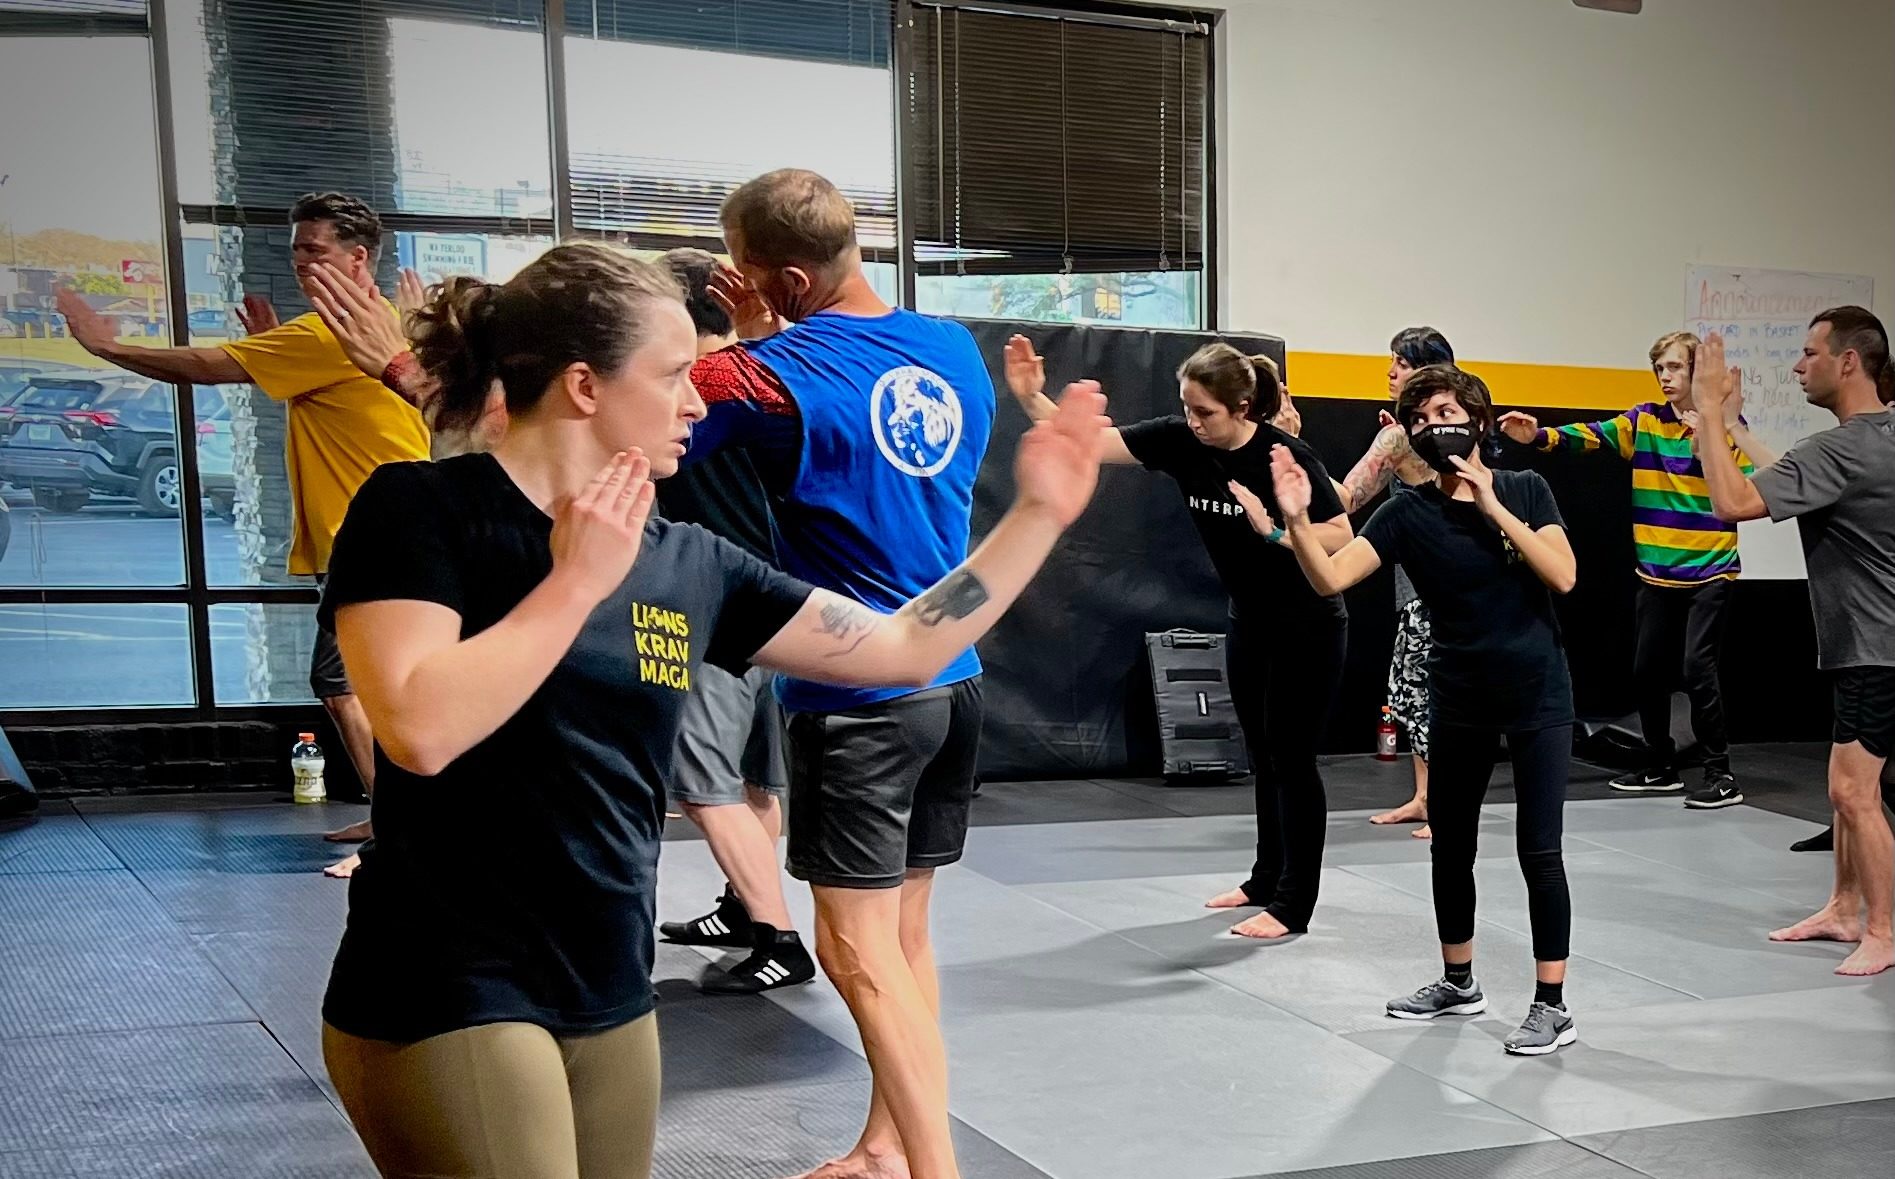 A Krav Maga studio in Austin is creating a safe place to train for